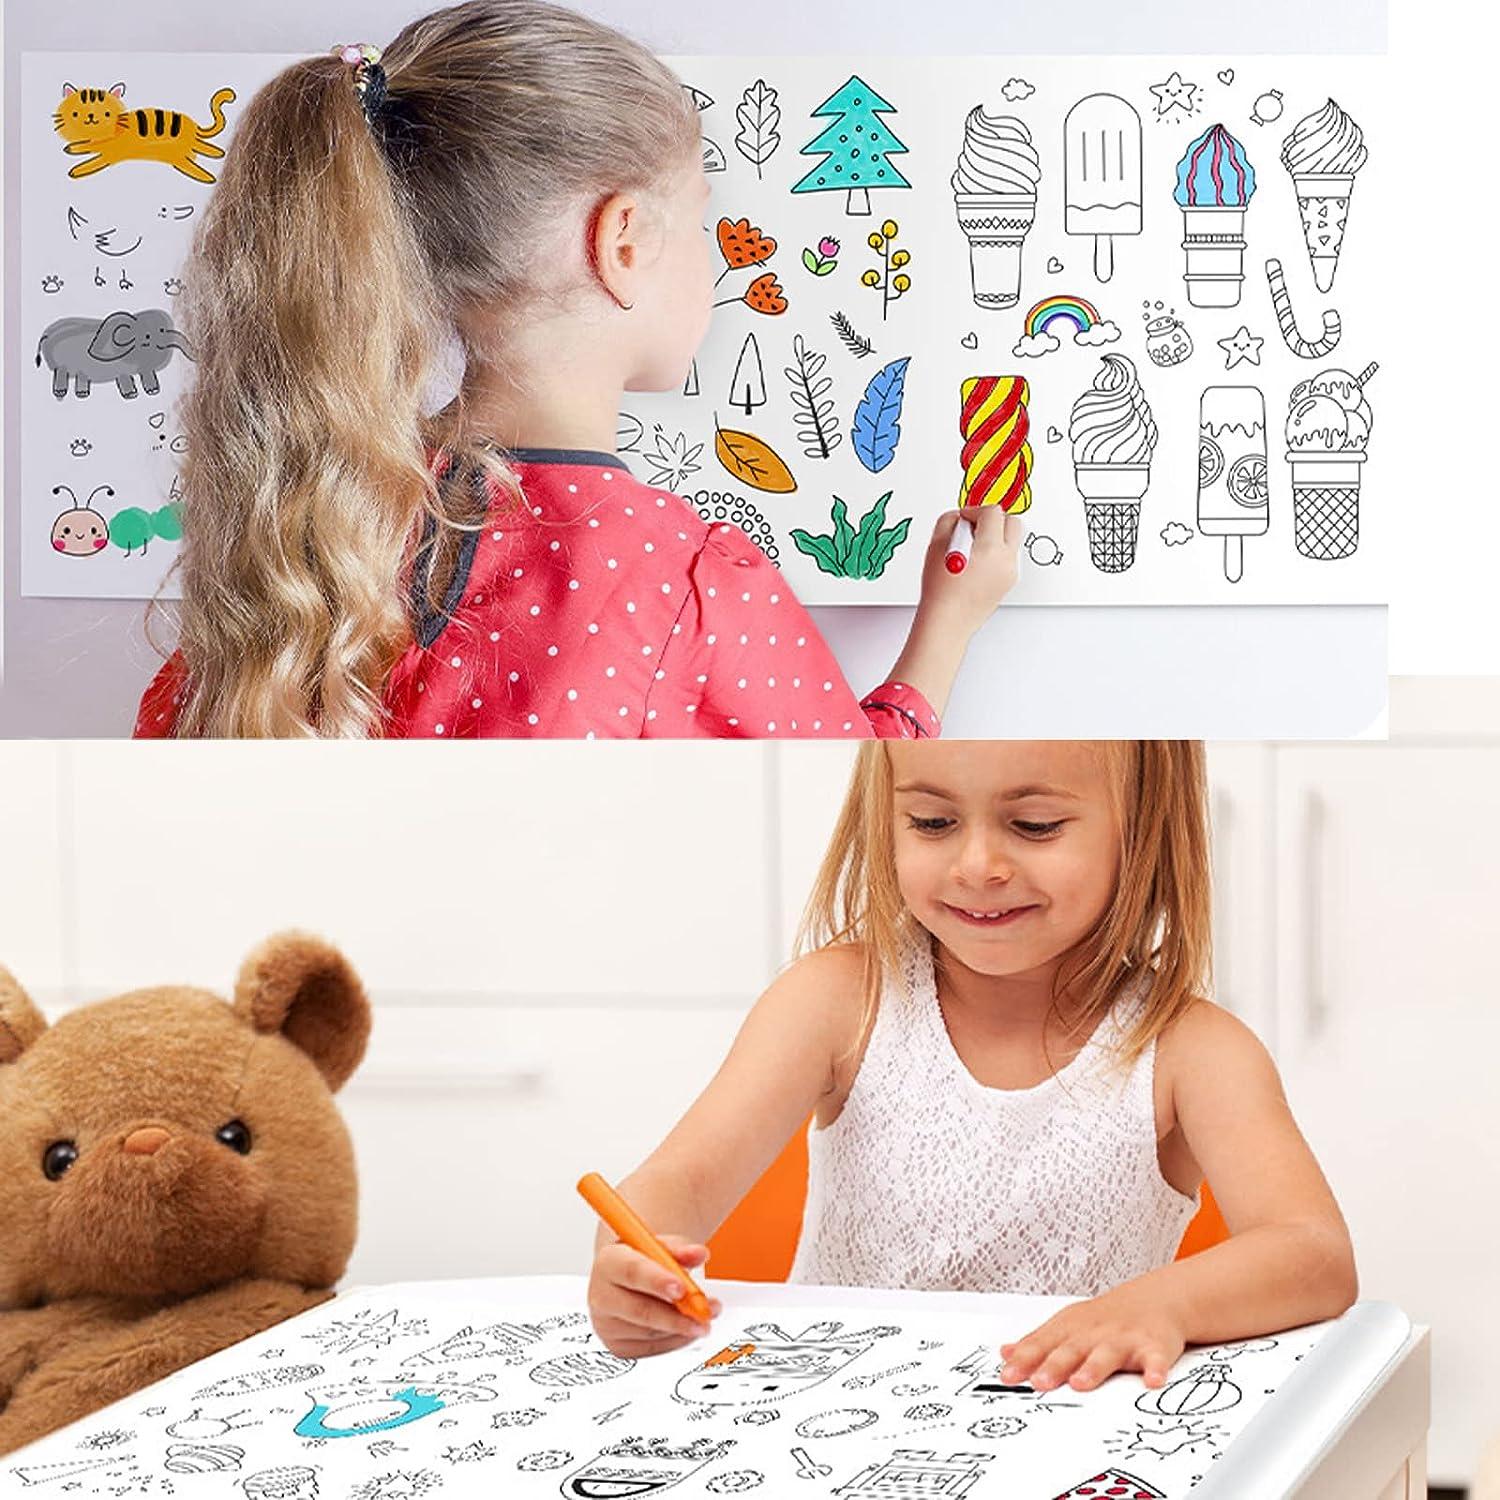 Children's Drawing Roll - Coloring Paper Roll for Kids, Drawing Paper Roll  DIY Painting Drawing Color Filling Paper, 118 * 11.8 Inches